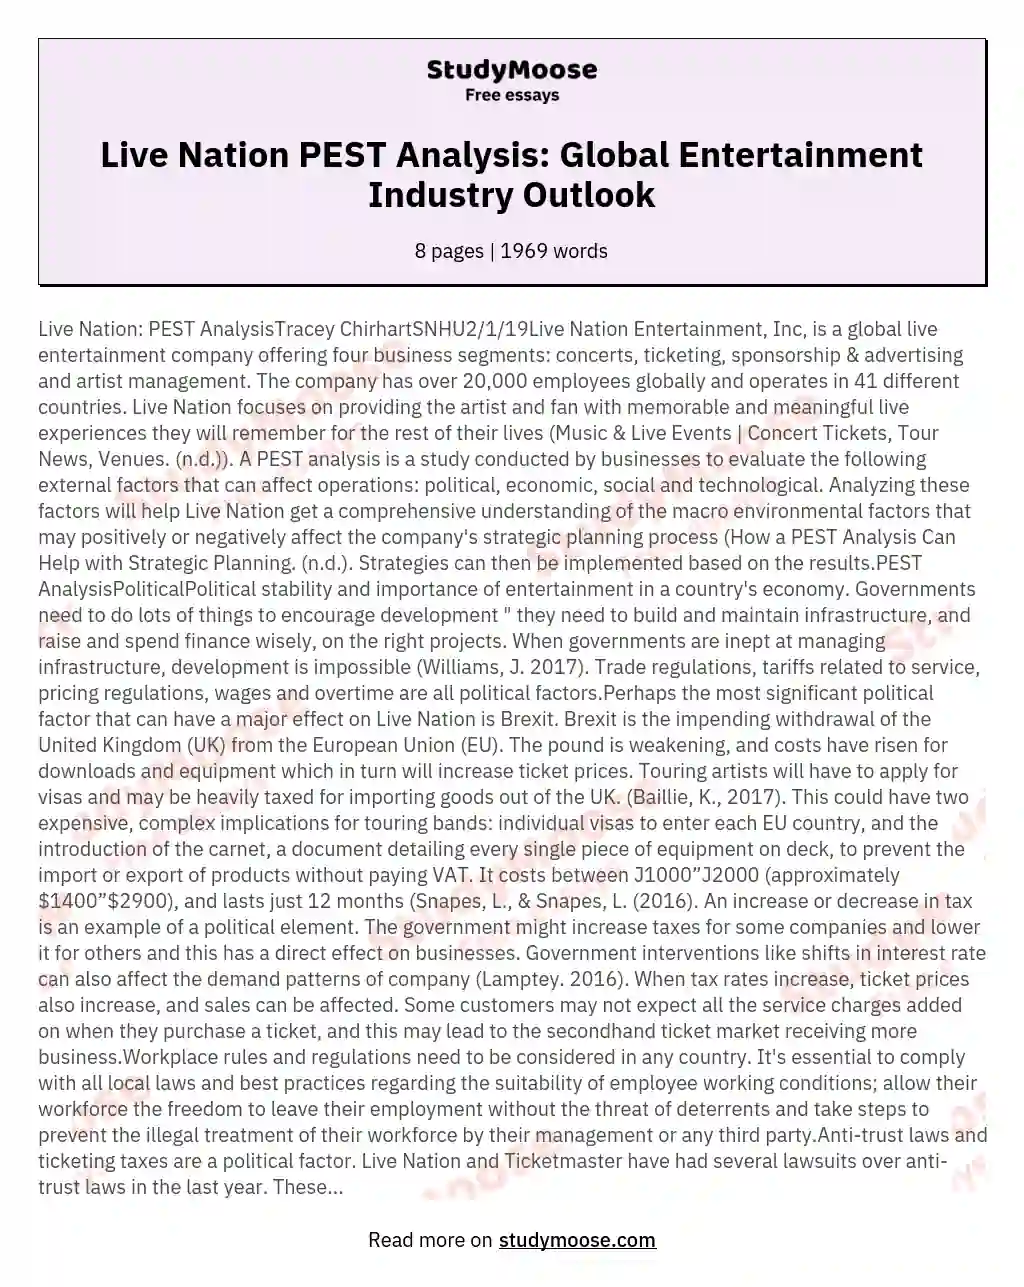 Live Nation PEST AnalysisTracey ChirhartSNHU2119Live Nation Entertainment Inc is a global